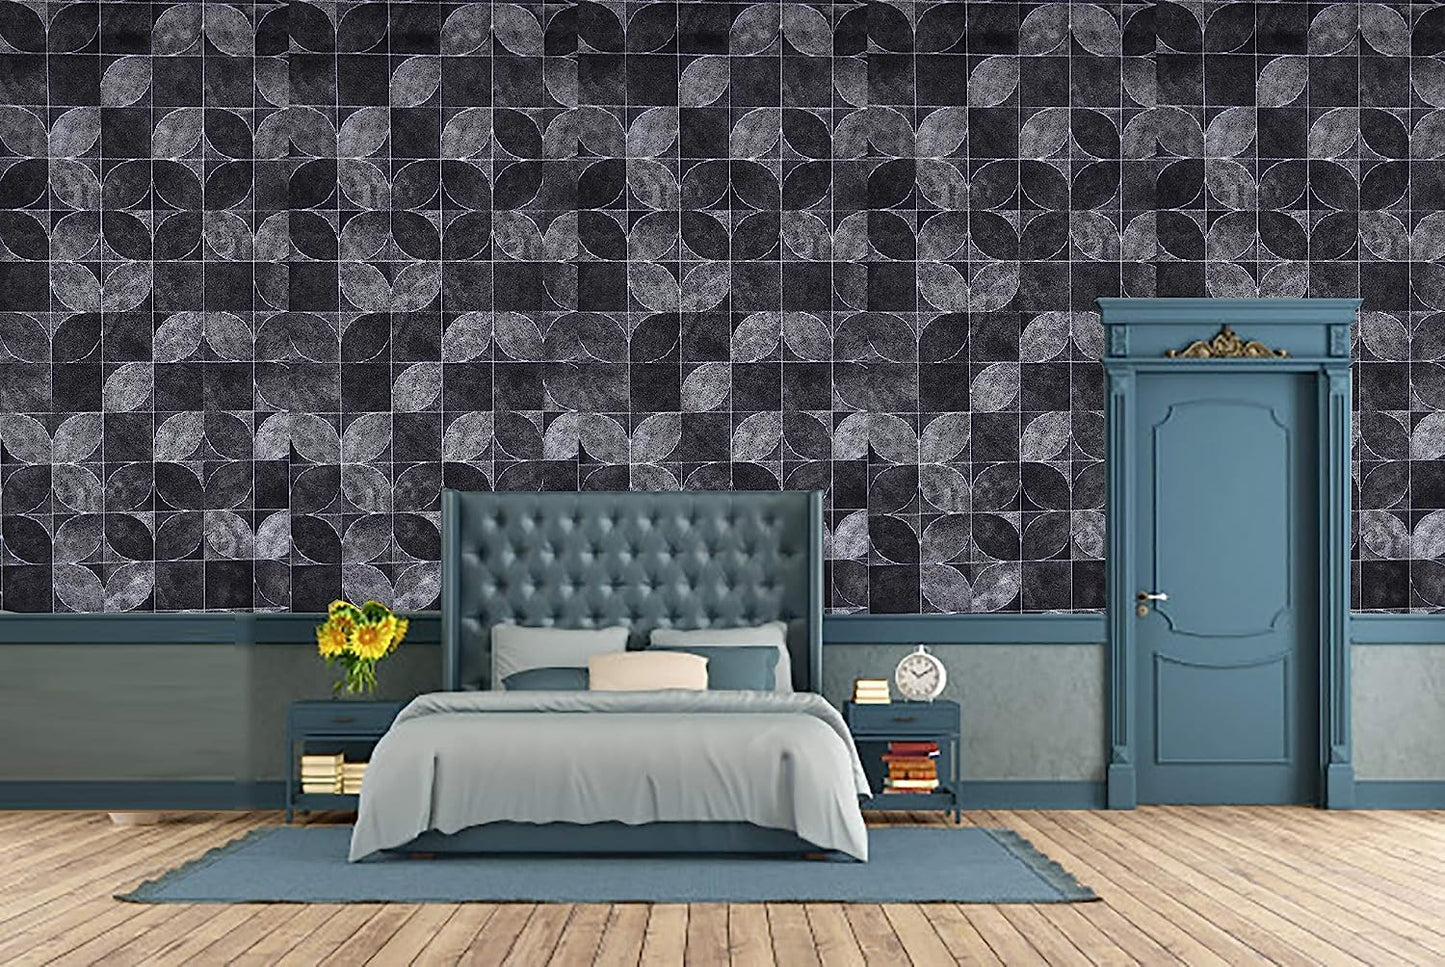 3D Latest American Leather Design Grey & Black Wallpaper Roll for Home Walls 57 Sq Ft (0.53m or 21 Inches x 10m or 33 Feet)